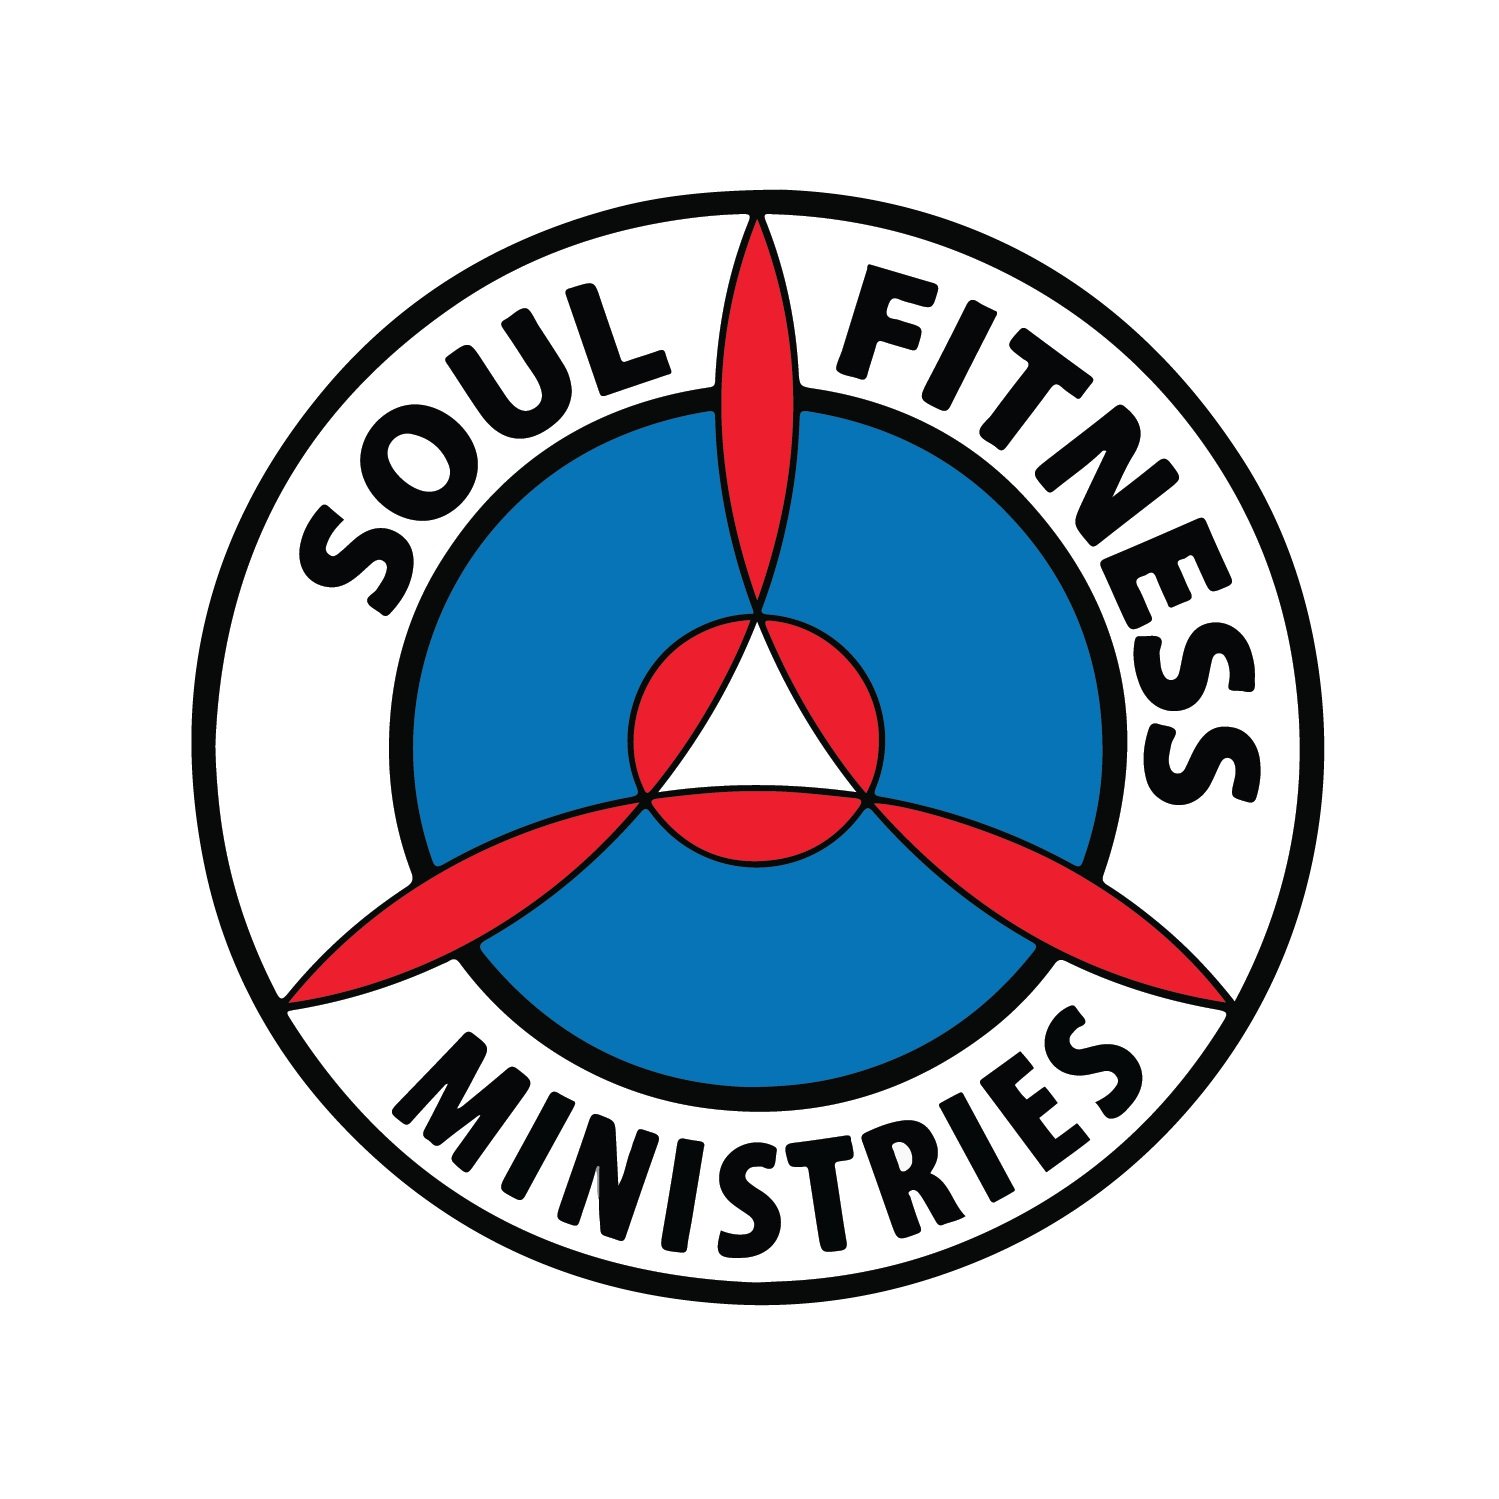 Soul Fitness Ministries